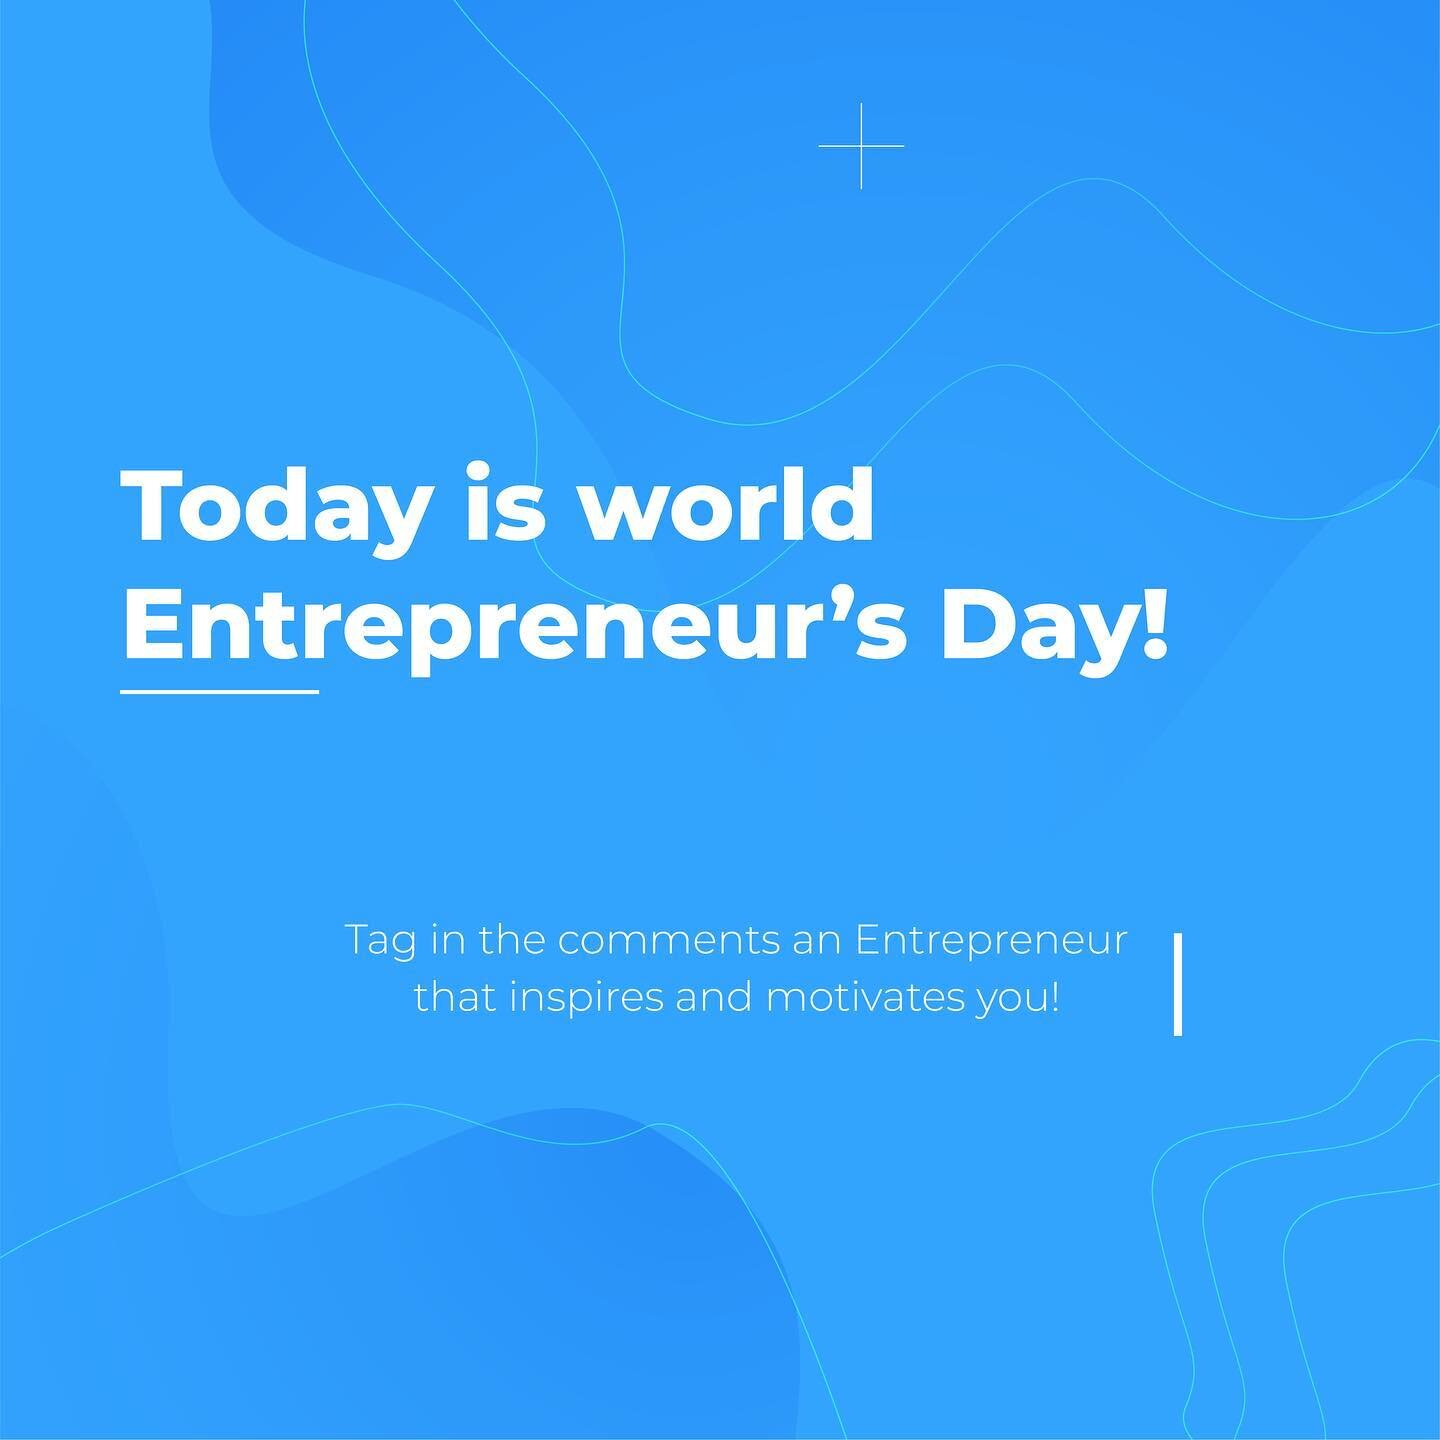 World Entrepreneur&rsquo;s Day is the perfect day to celebrate founders, managers, producers, contractors, industrialists, innovators, administrators, designers, and developers! 🚀
We believe entrepreneurship is the greatest force of change and we ar